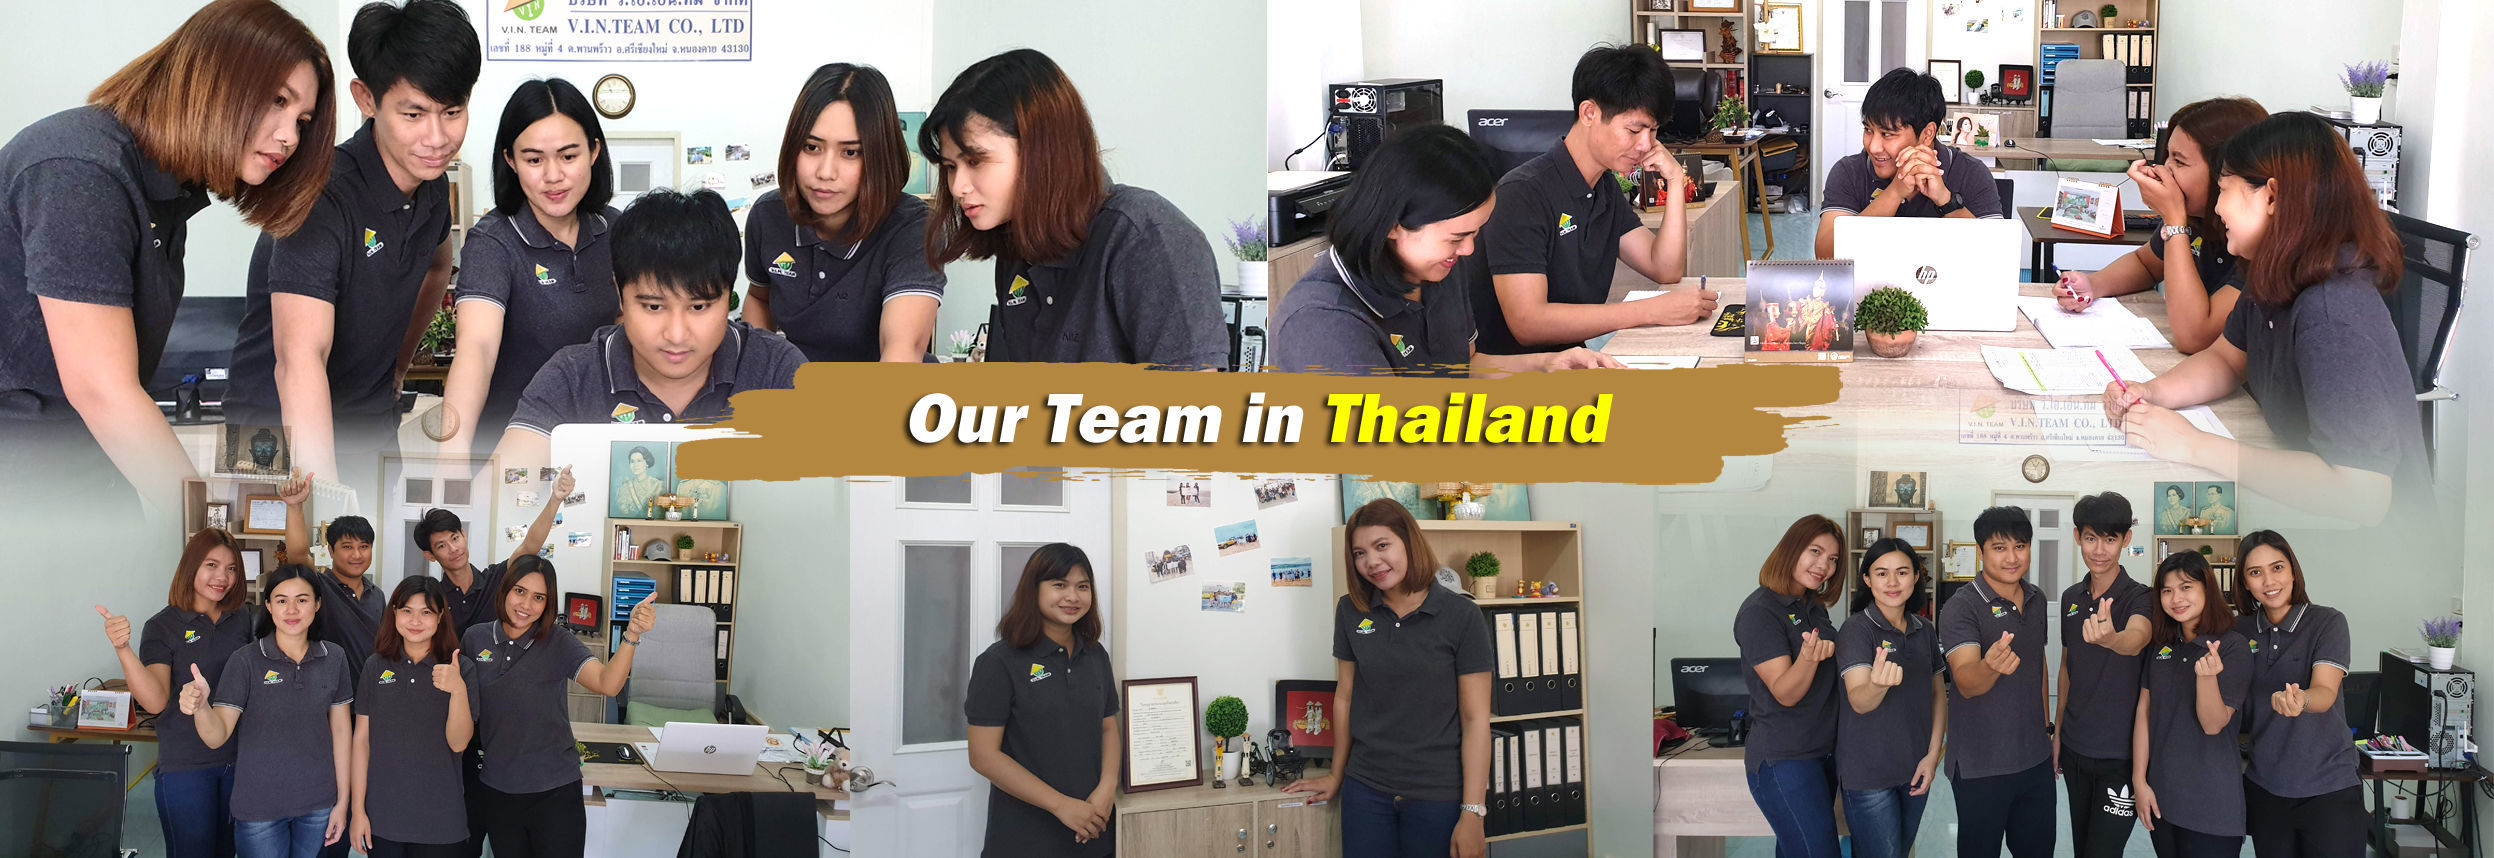 Our Team in Thailand